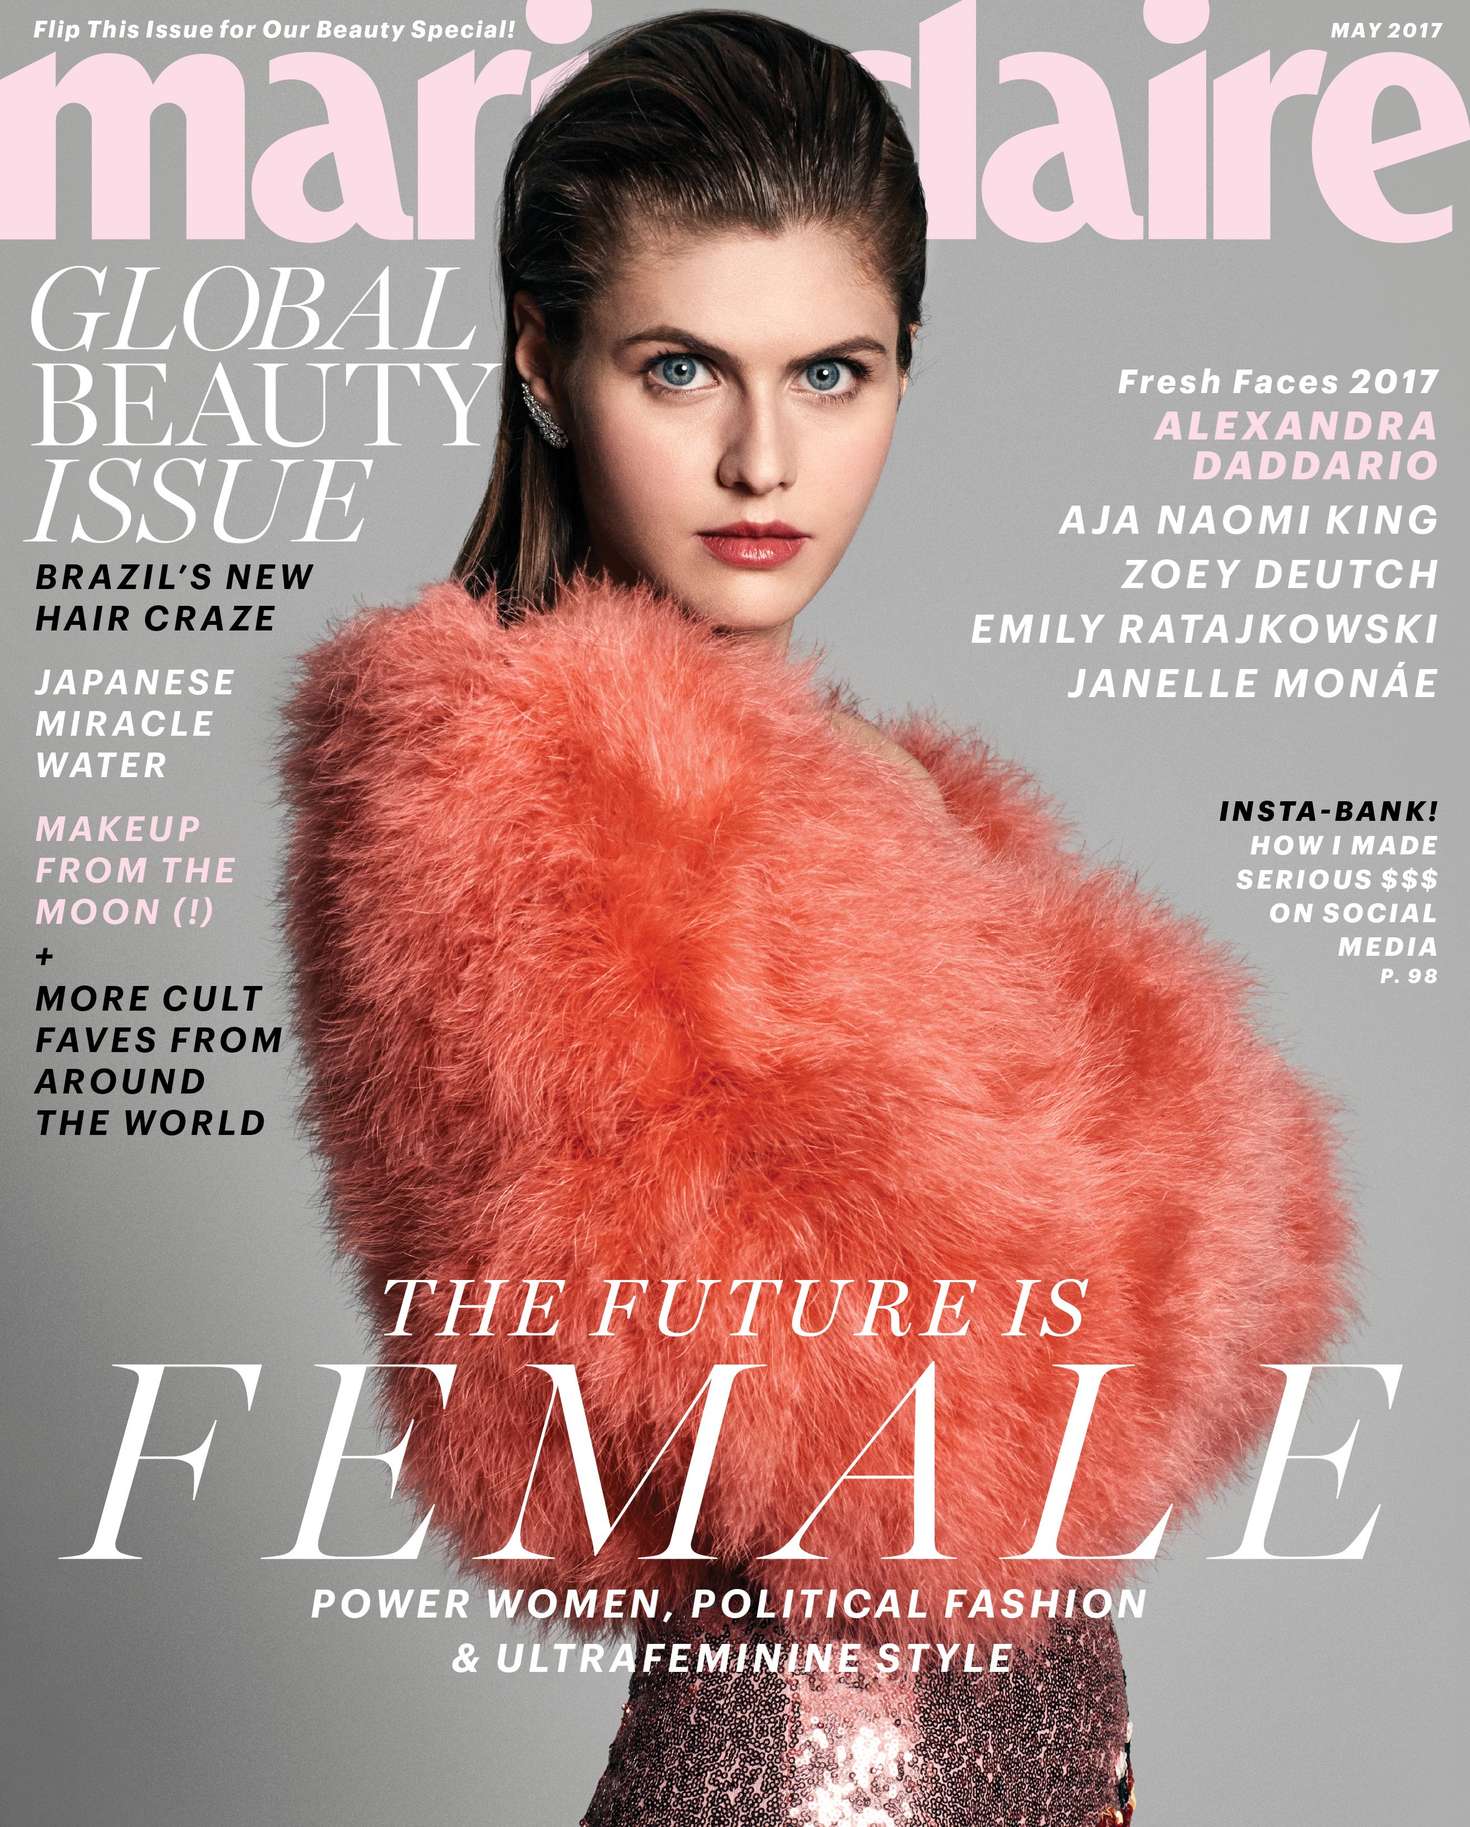 Alexandra Daddario for Marie Claire Magazine (May 2017)